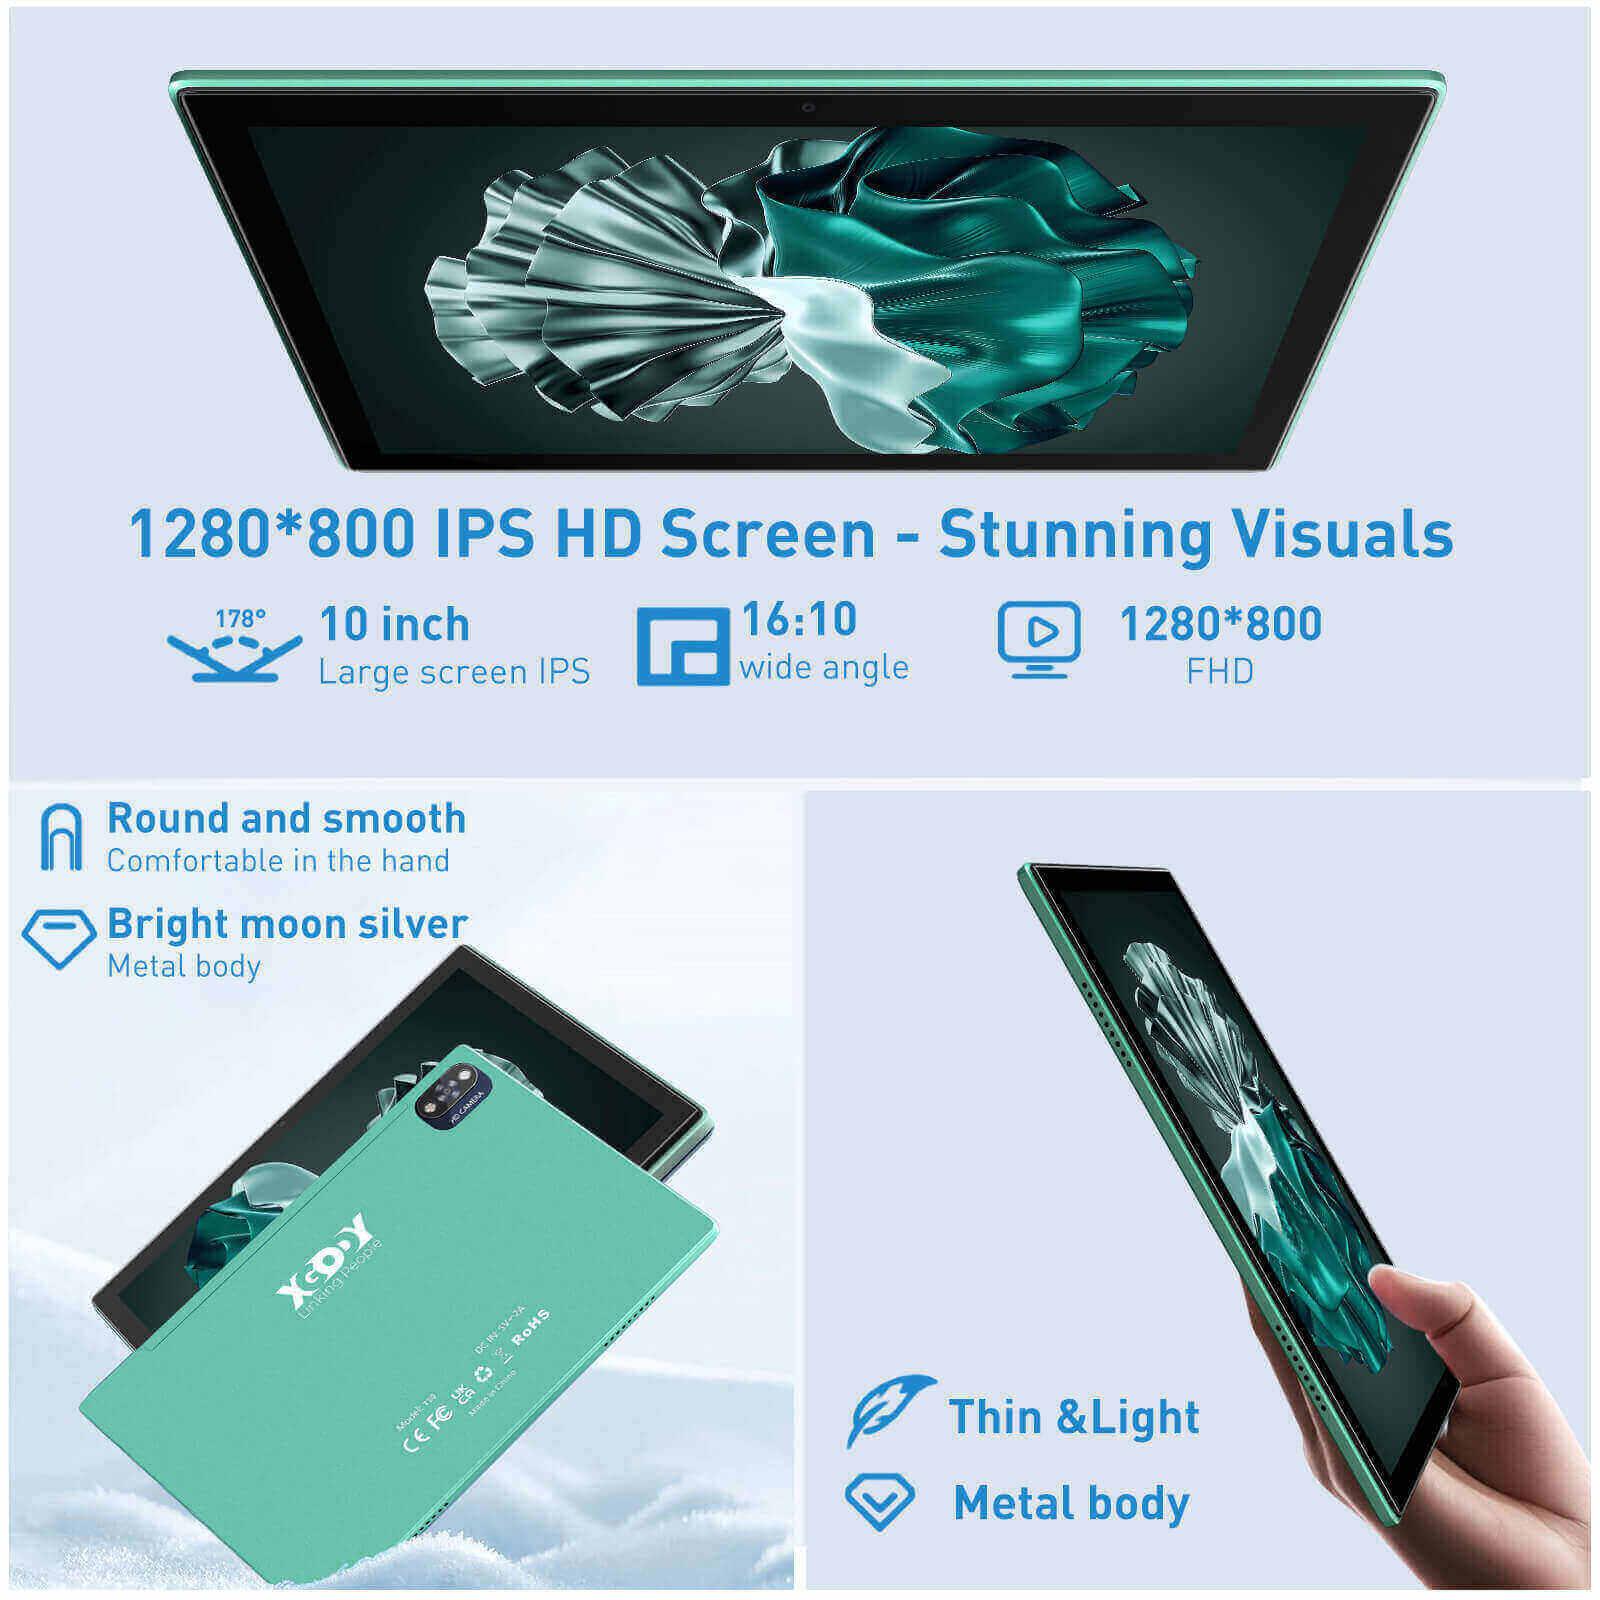 Cost-effective and Most worthwhile XGODY T10 With Long Battery Life, HD Display, And Dual Cameras, Budget-Friendly 10.1 Inch Tablet - XGODY 